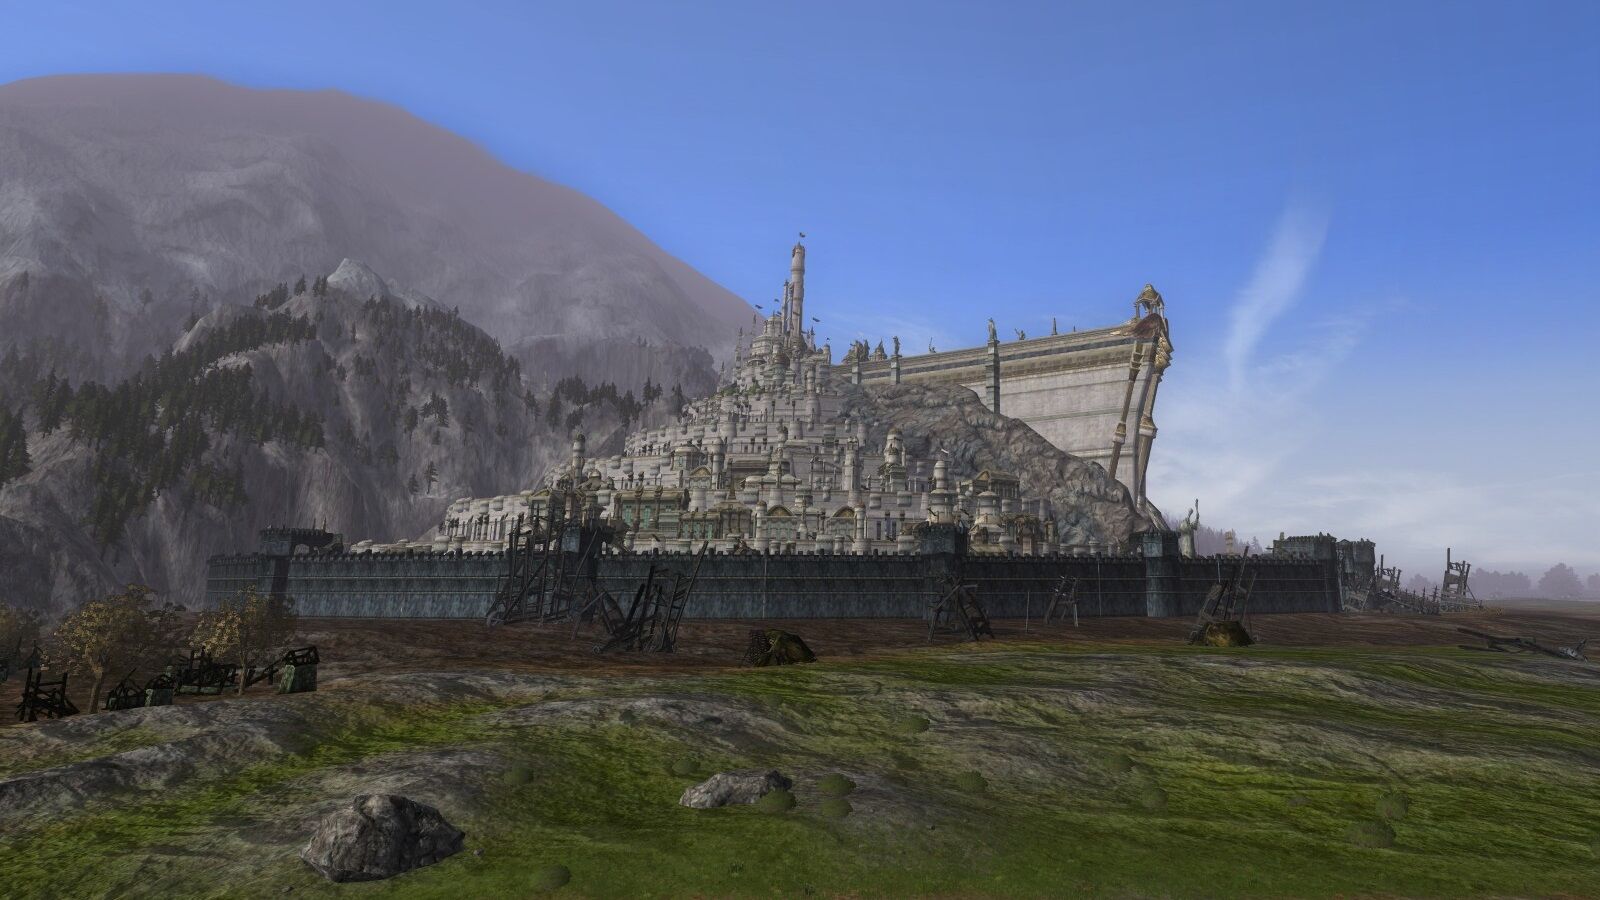 Minas Tirith, the citadel of Gondor  Lord of the rings, Fantasy places,  Castle designs